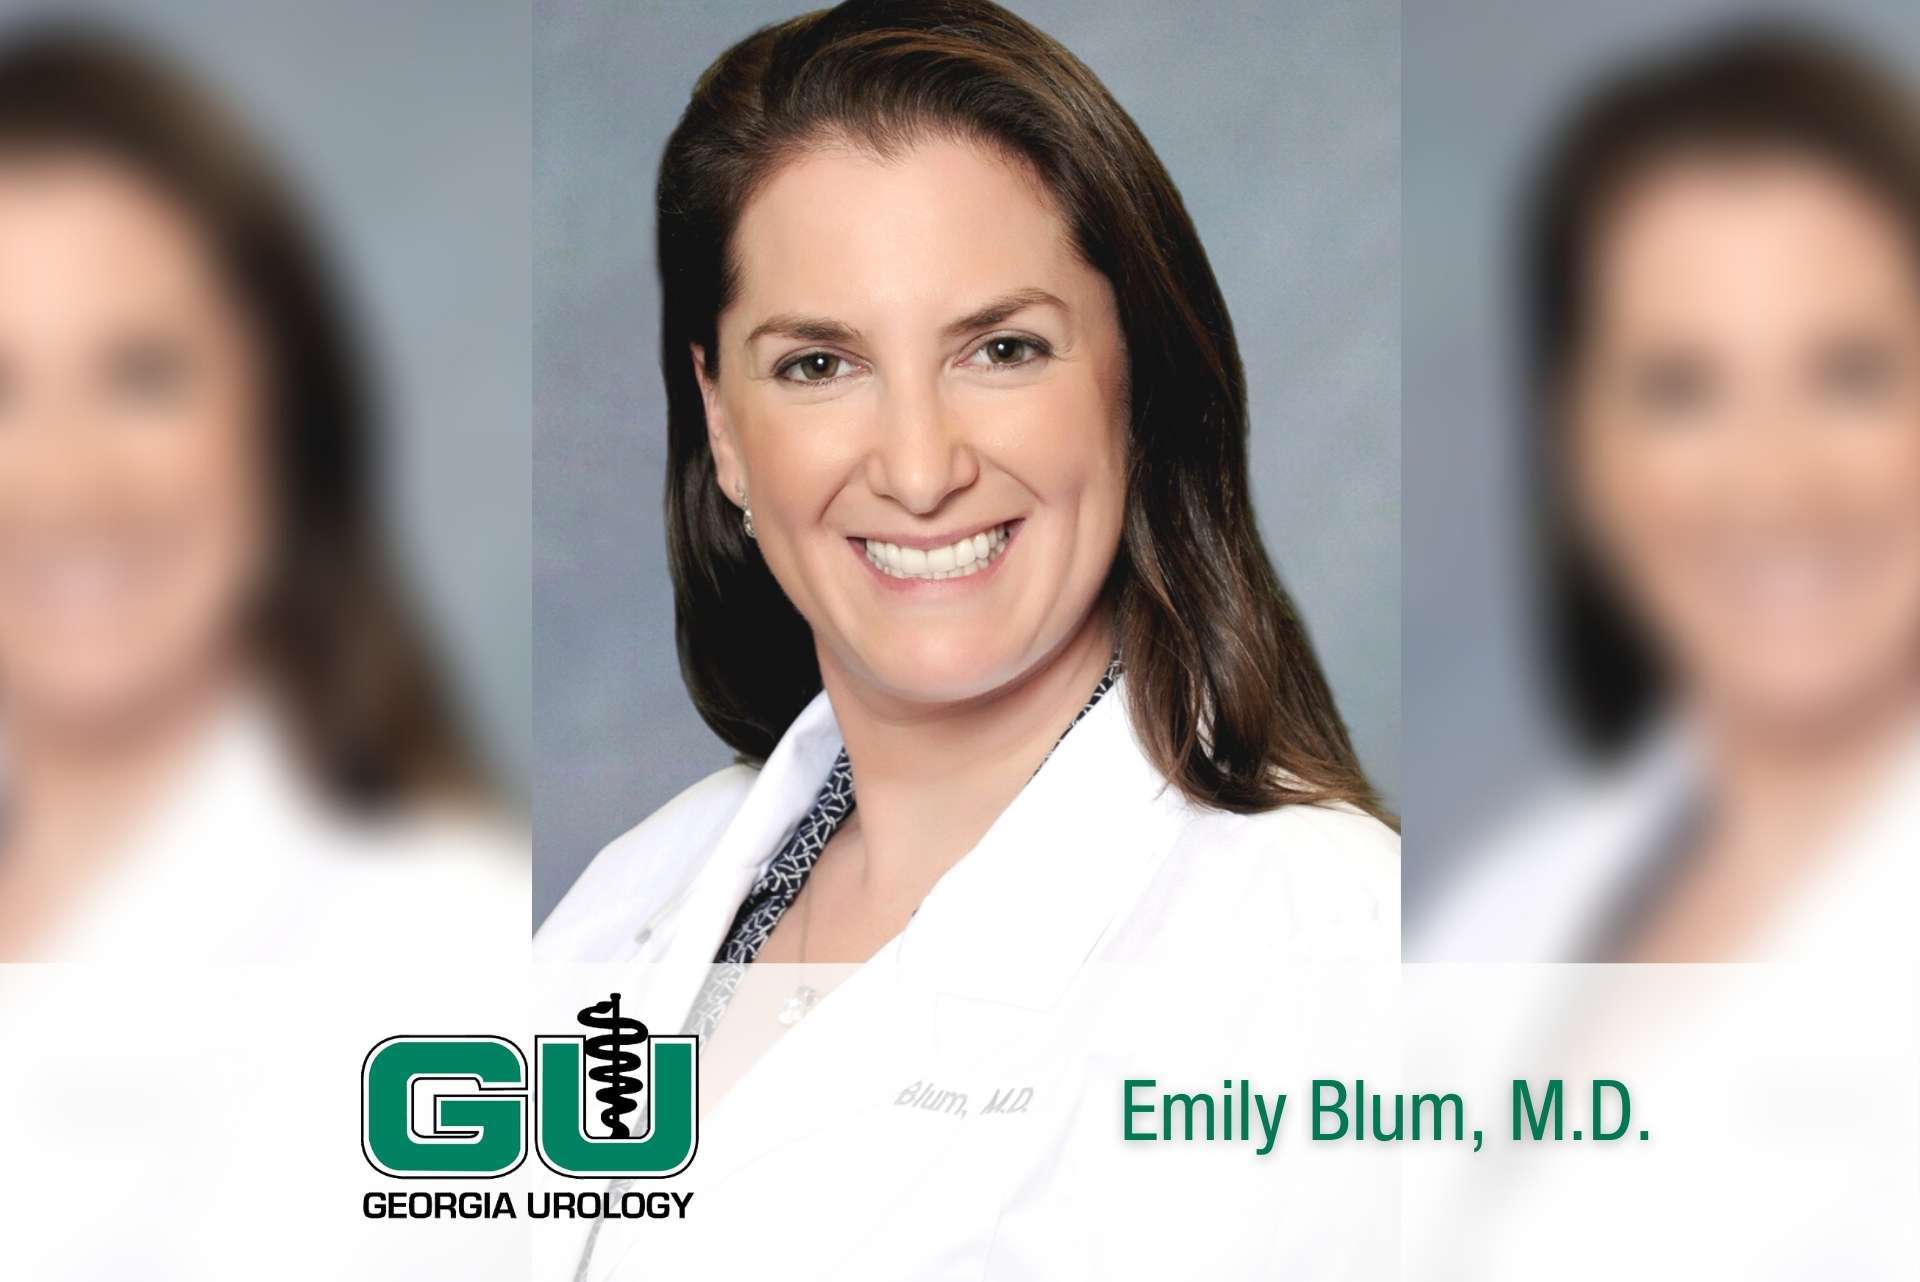 Dr. Emily Blum becomes board certified in pediatric urology